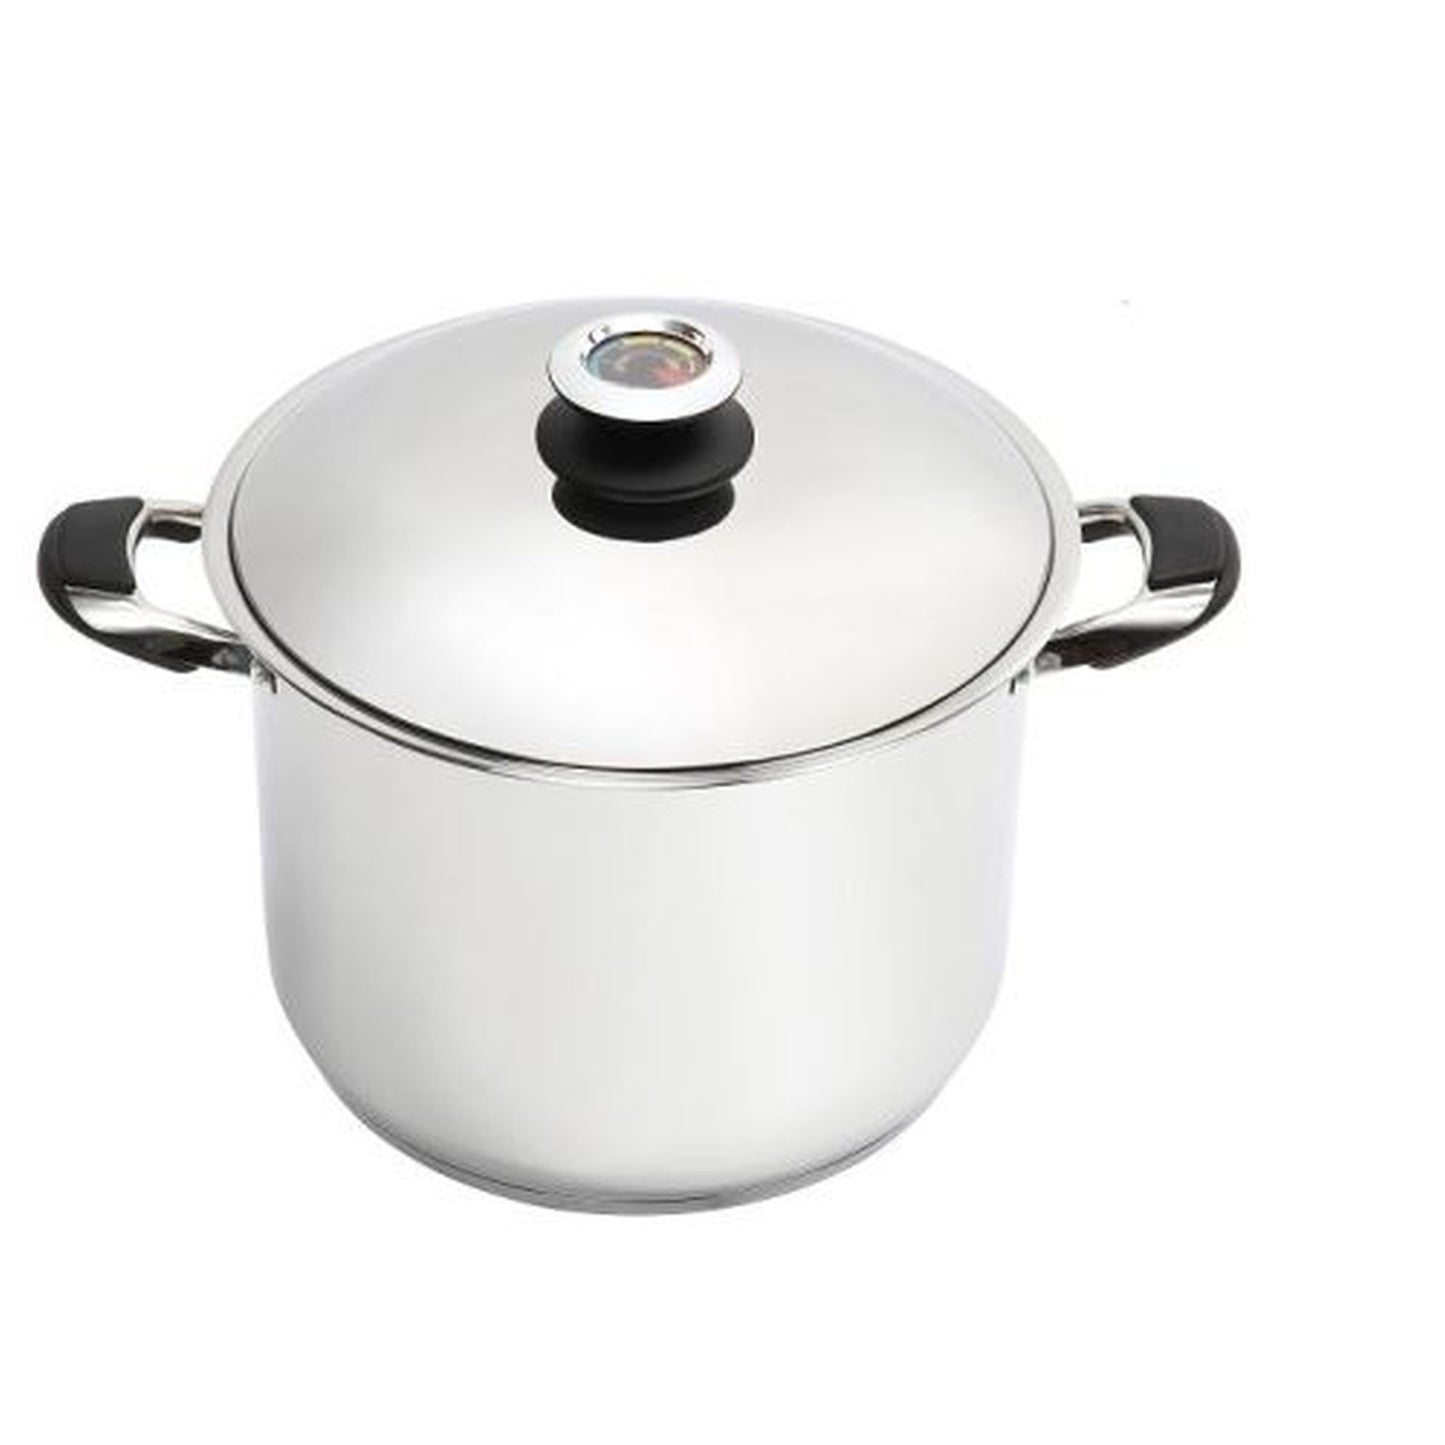 Lorenzo Stainless Steel 15 Qt Stock Pot Design By Valenti, Stainless Steel